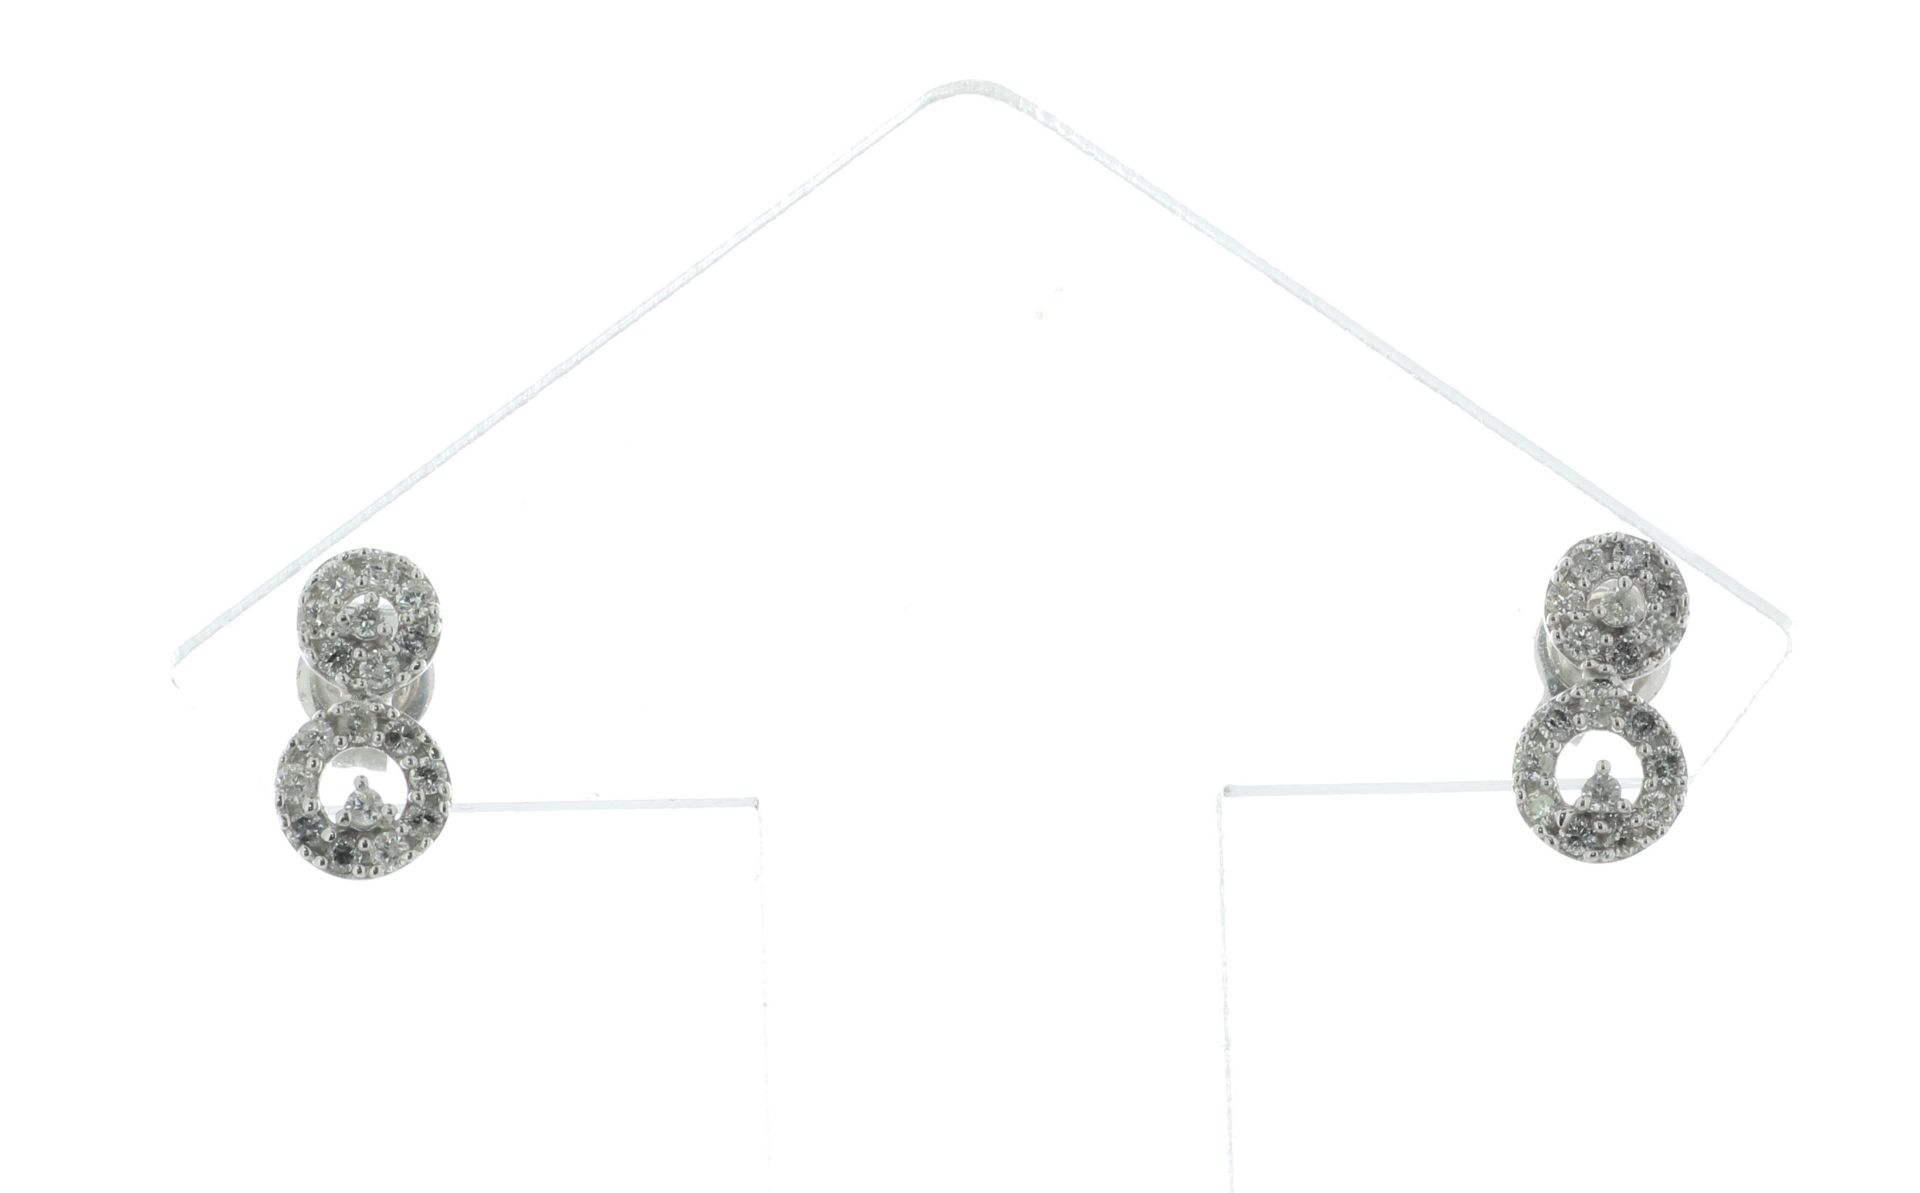 18ct White Gold Round Cluster Claw Set Diamond Earring 0.35 Carats - Valued By IDI £2,850.00 - These - Image 5 of 6